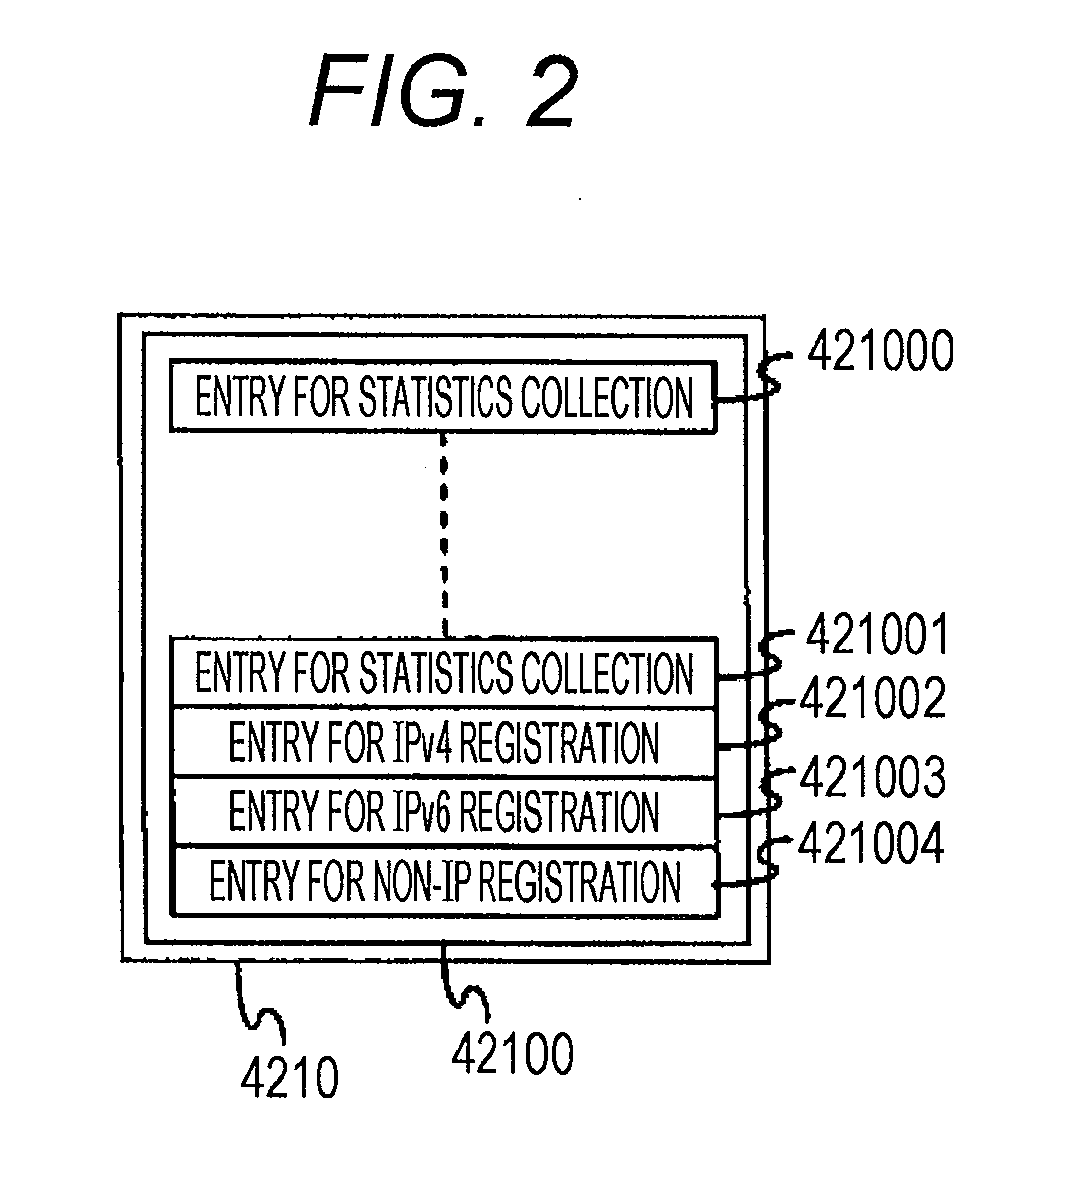 Packet relay device and packet relay method